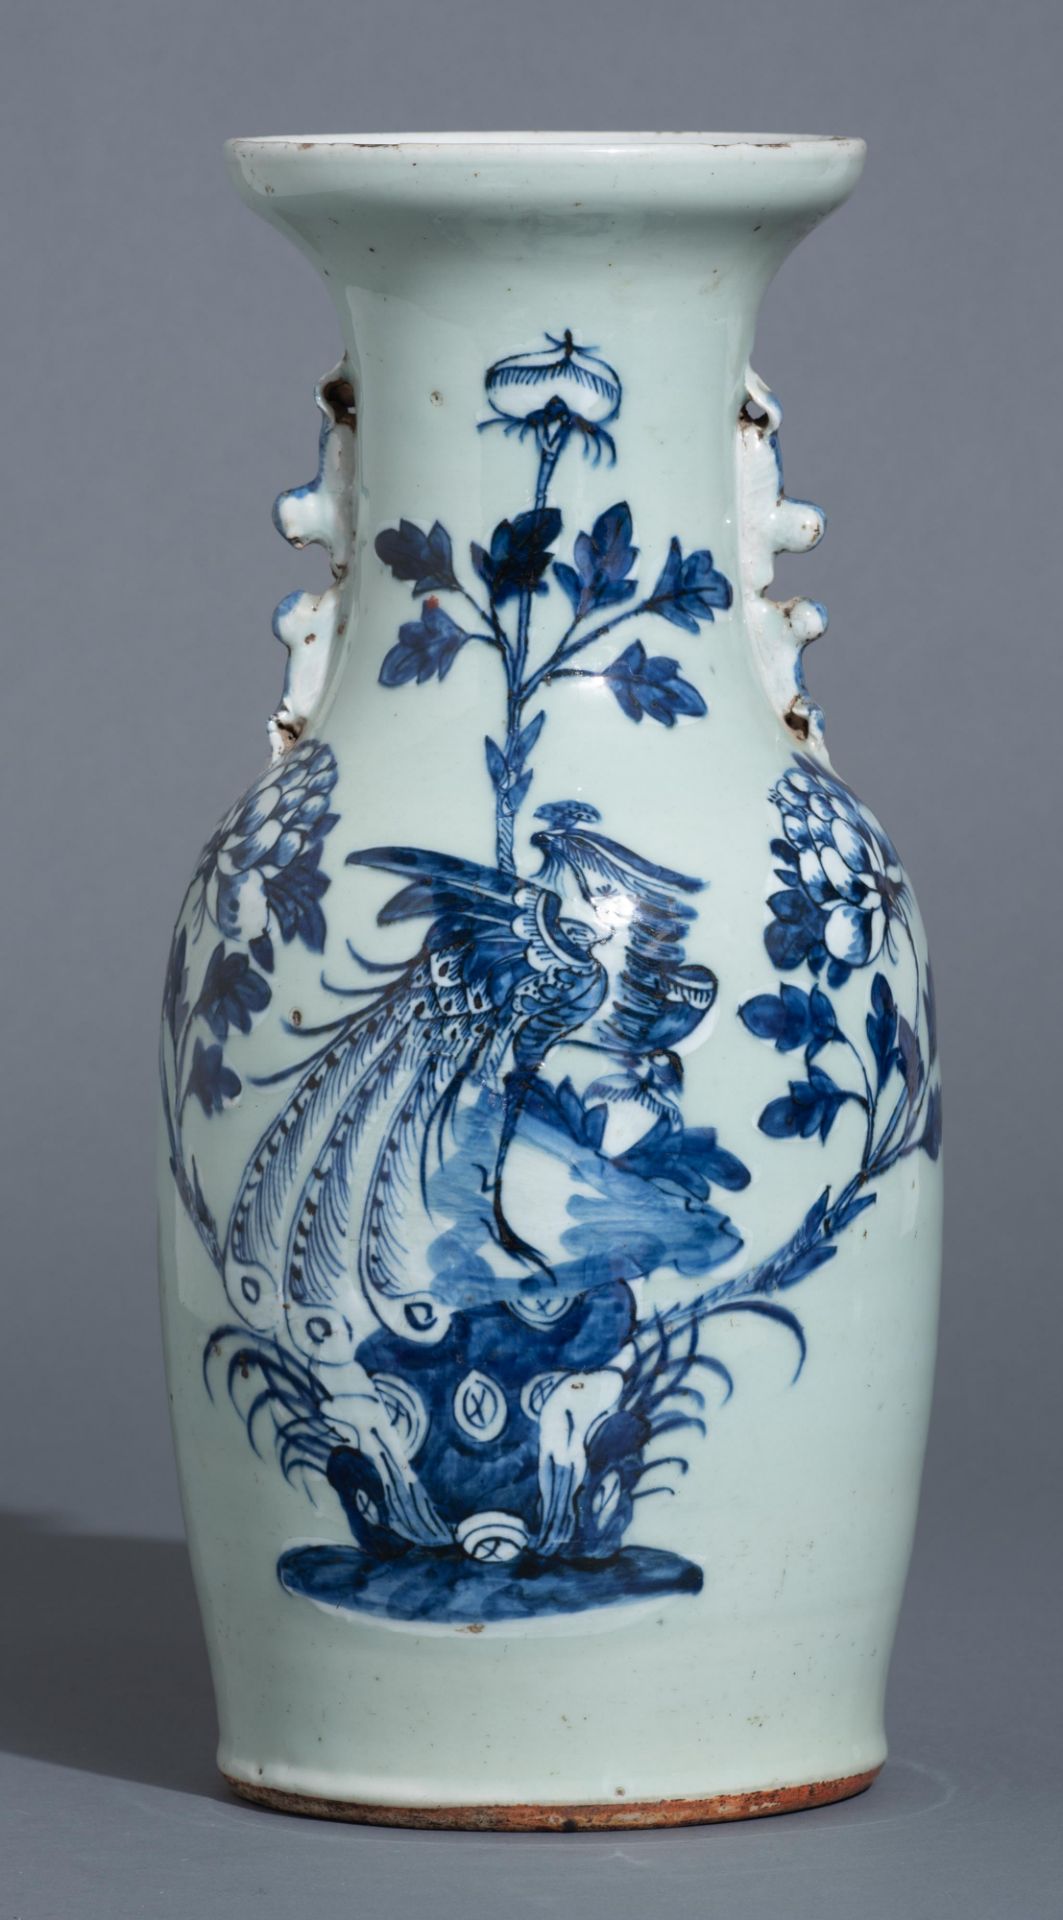 Four Chinese blue and white on celadon ground vases, late 19thC, H 42 - 43 cm - Image 34 of 52